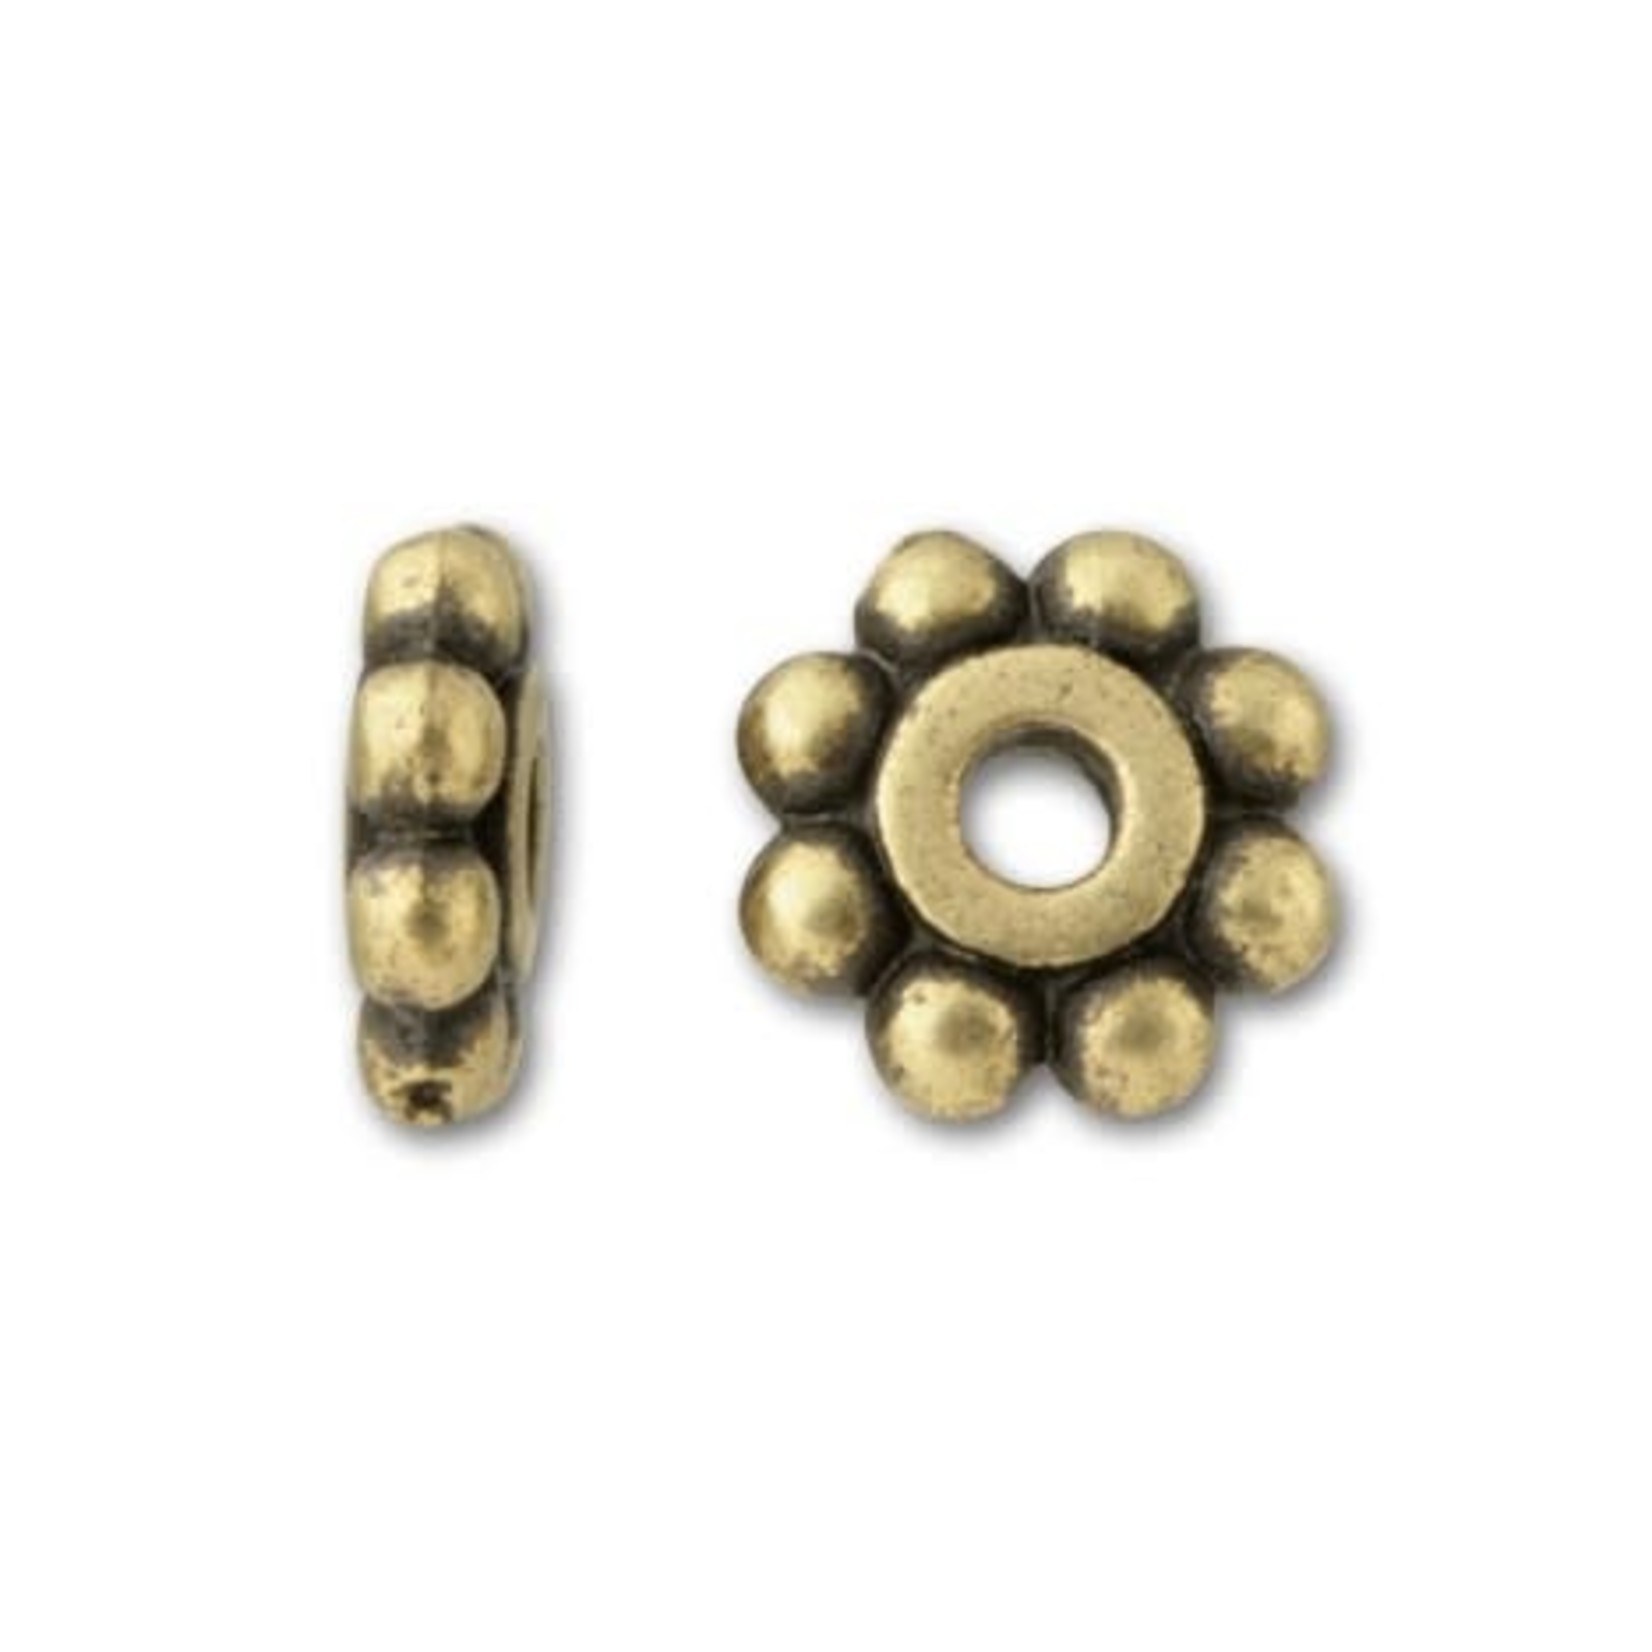 Tierracast Brass Oxide Plated 6mm Plated Daisy Spacer Bead - 20 pieces